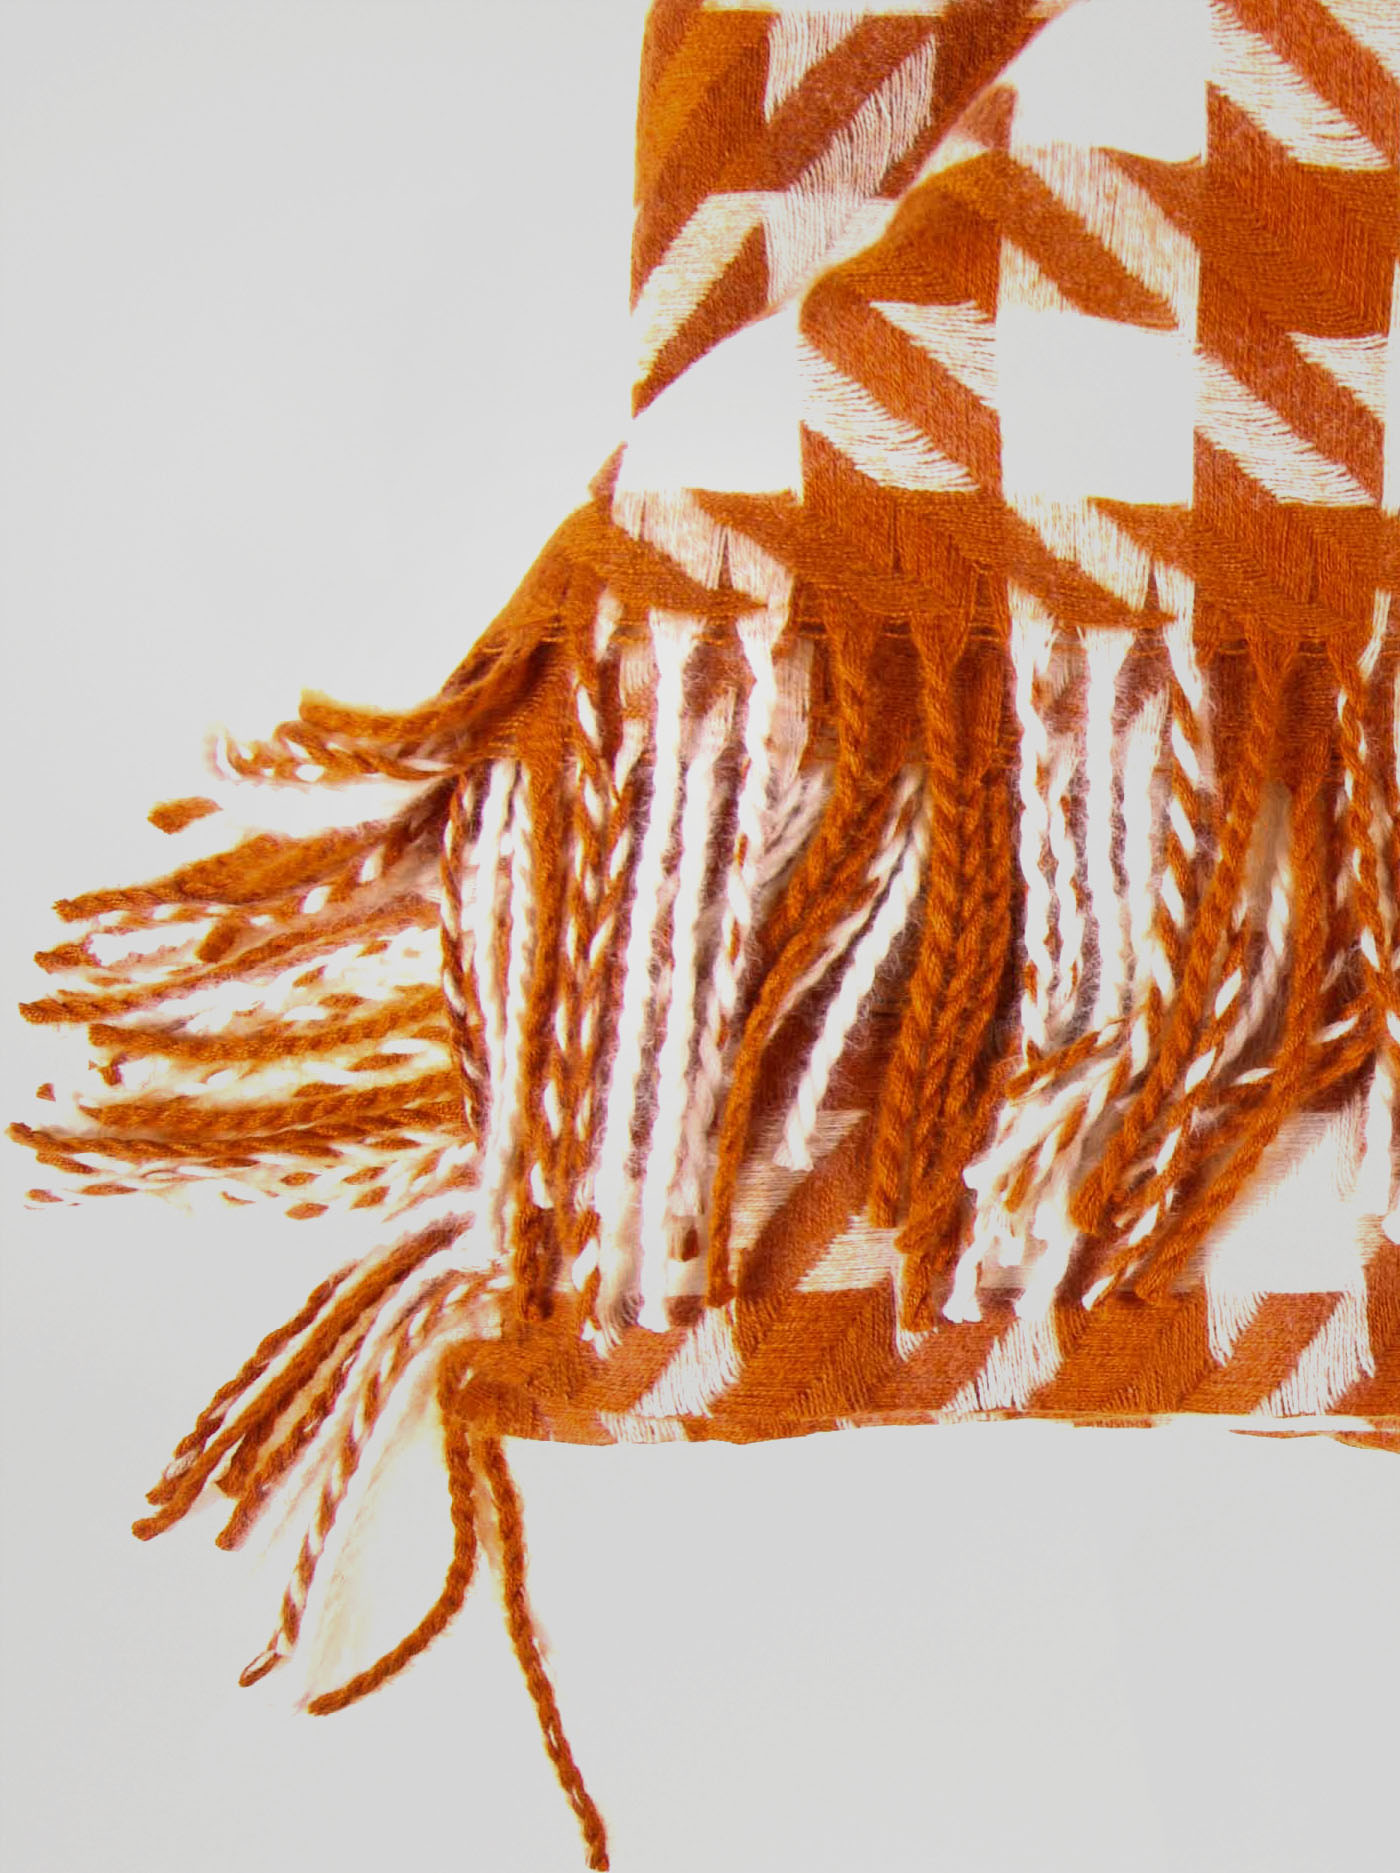 Scarf with pattern image 3